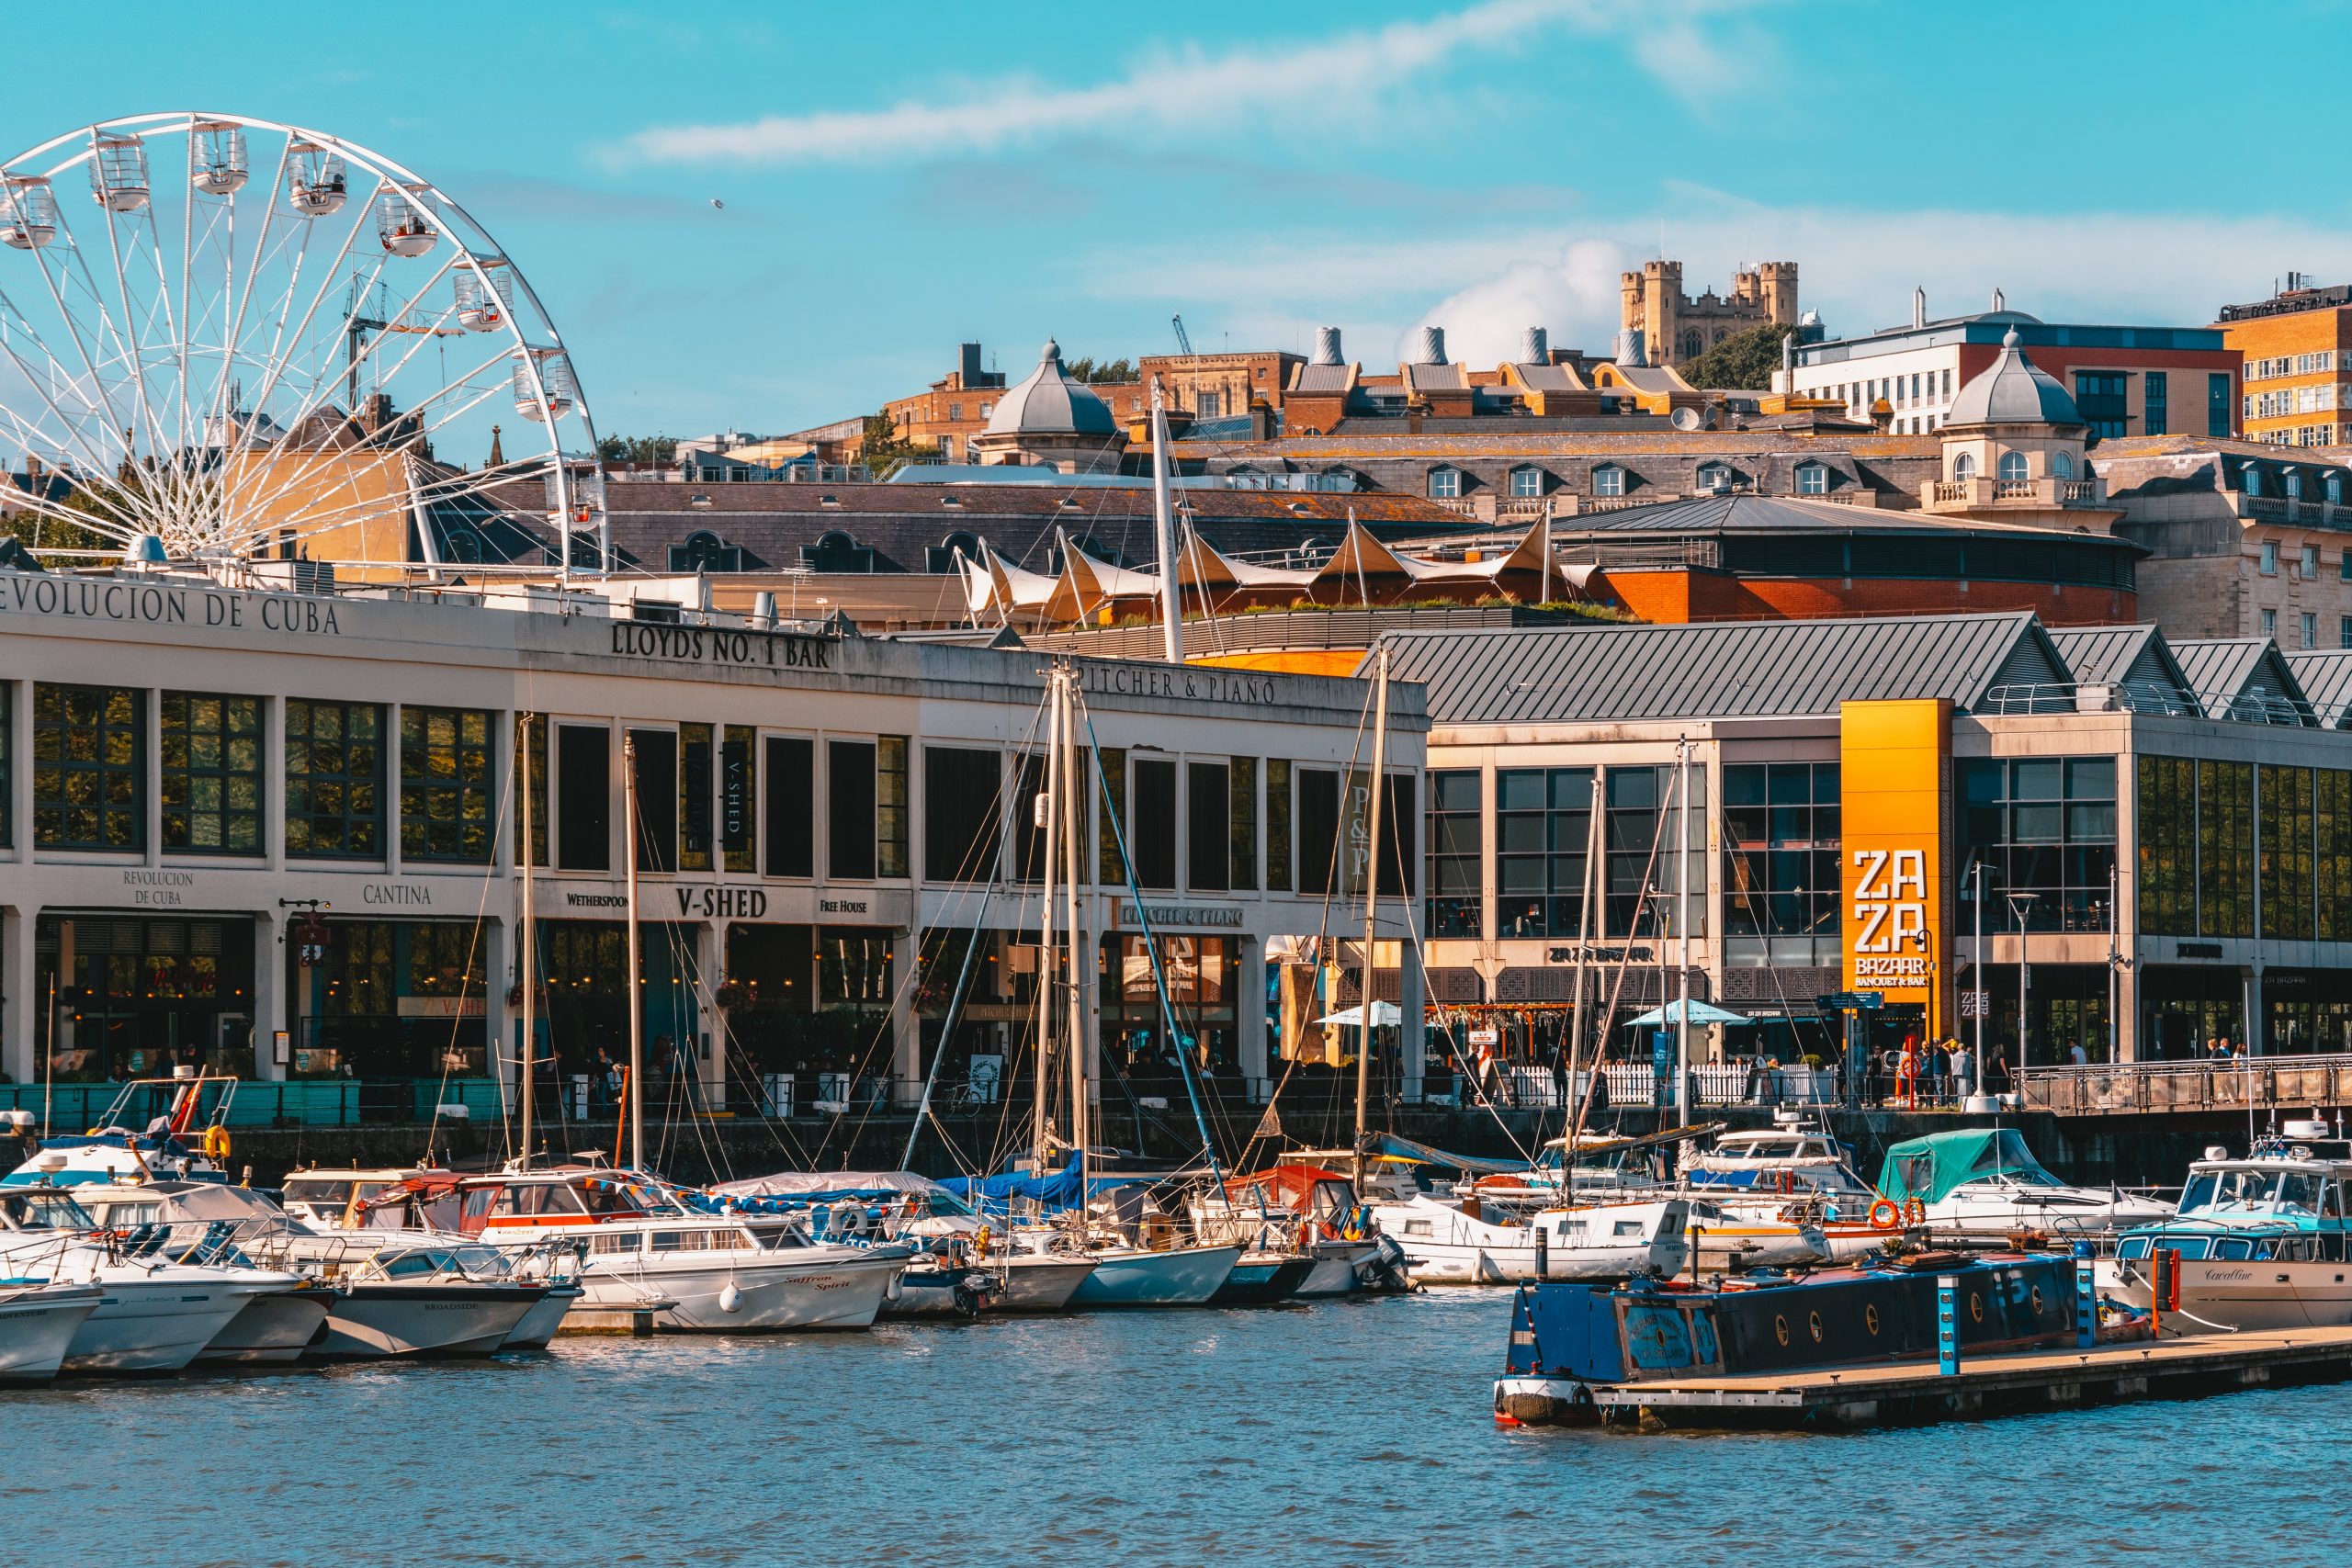  City Guide for the English City Bristol